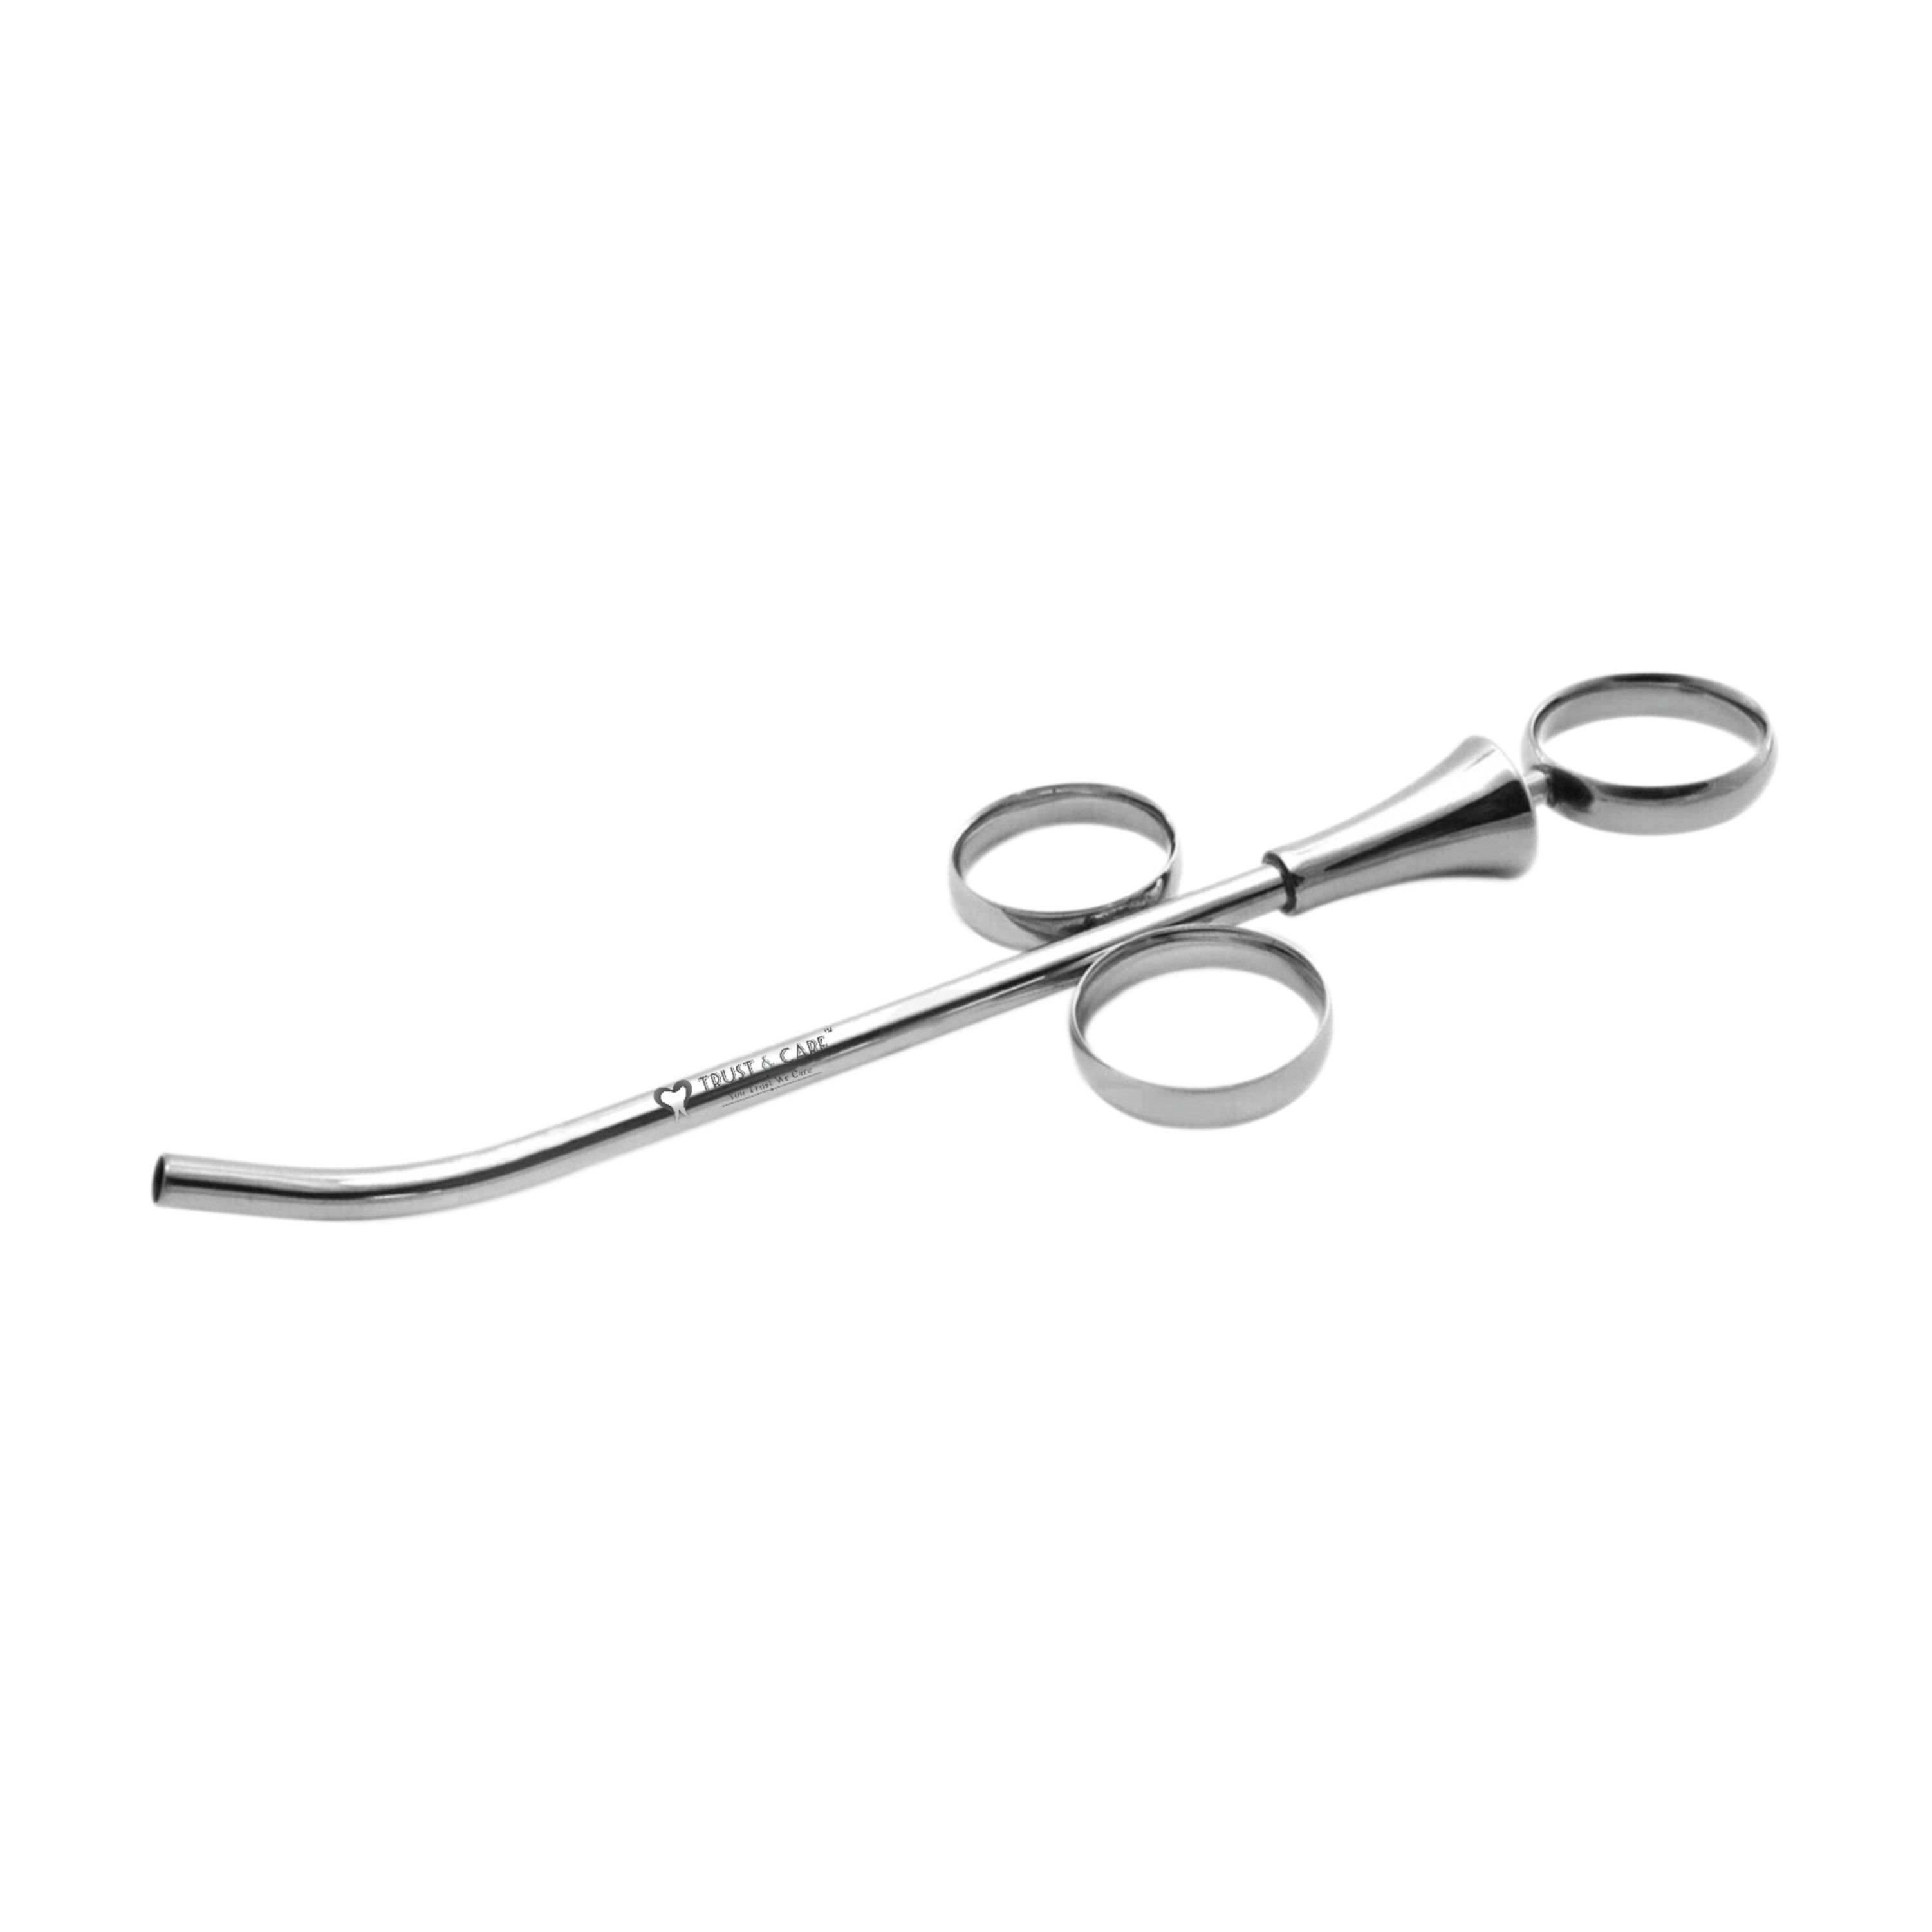 Trust & Care Bone Injector & Collector 3.5Mm Curved